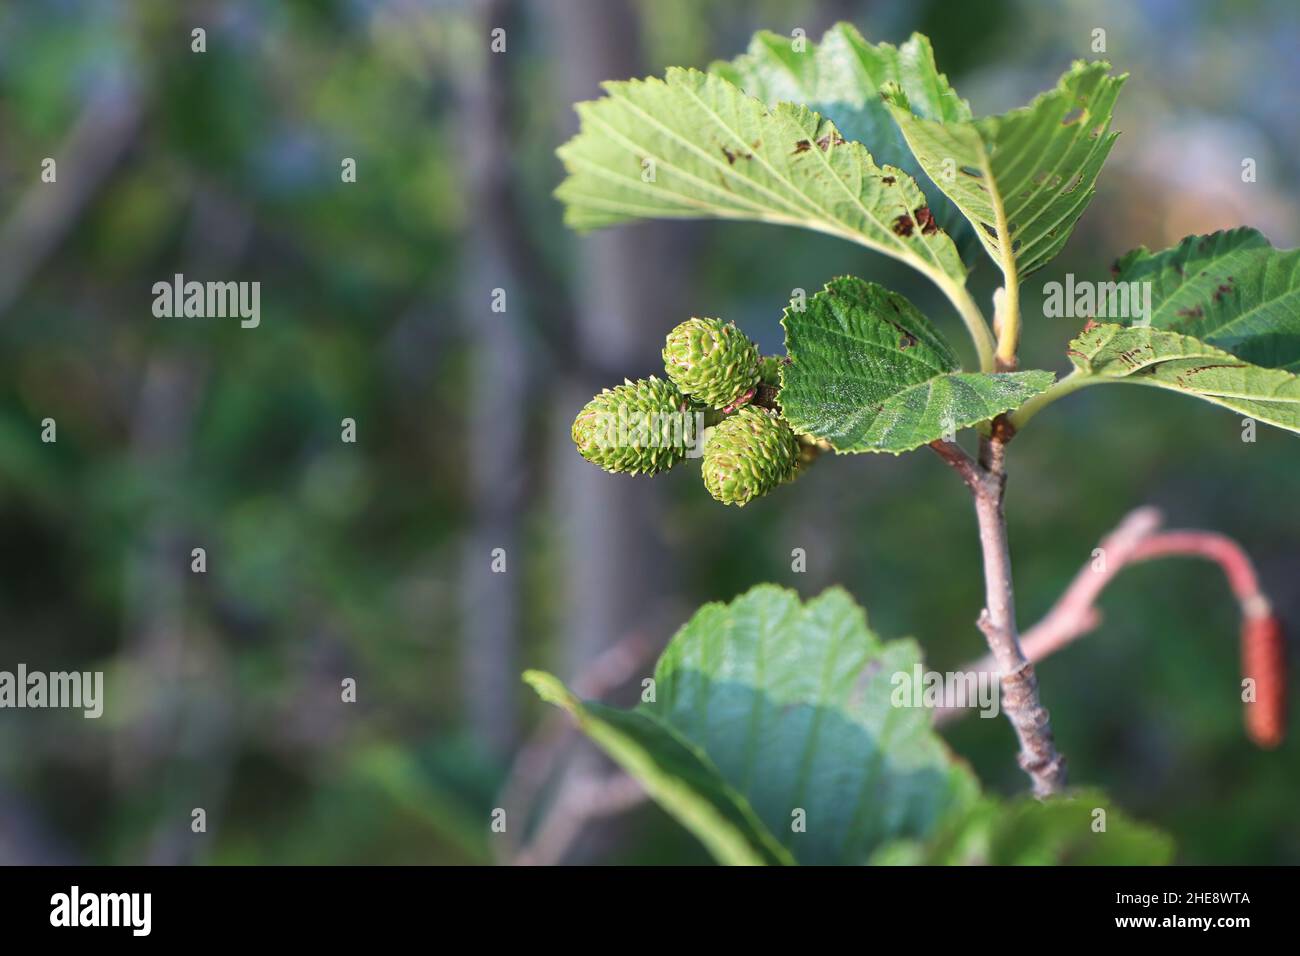 Seed pods forming on an Alder shrub Stock Photo